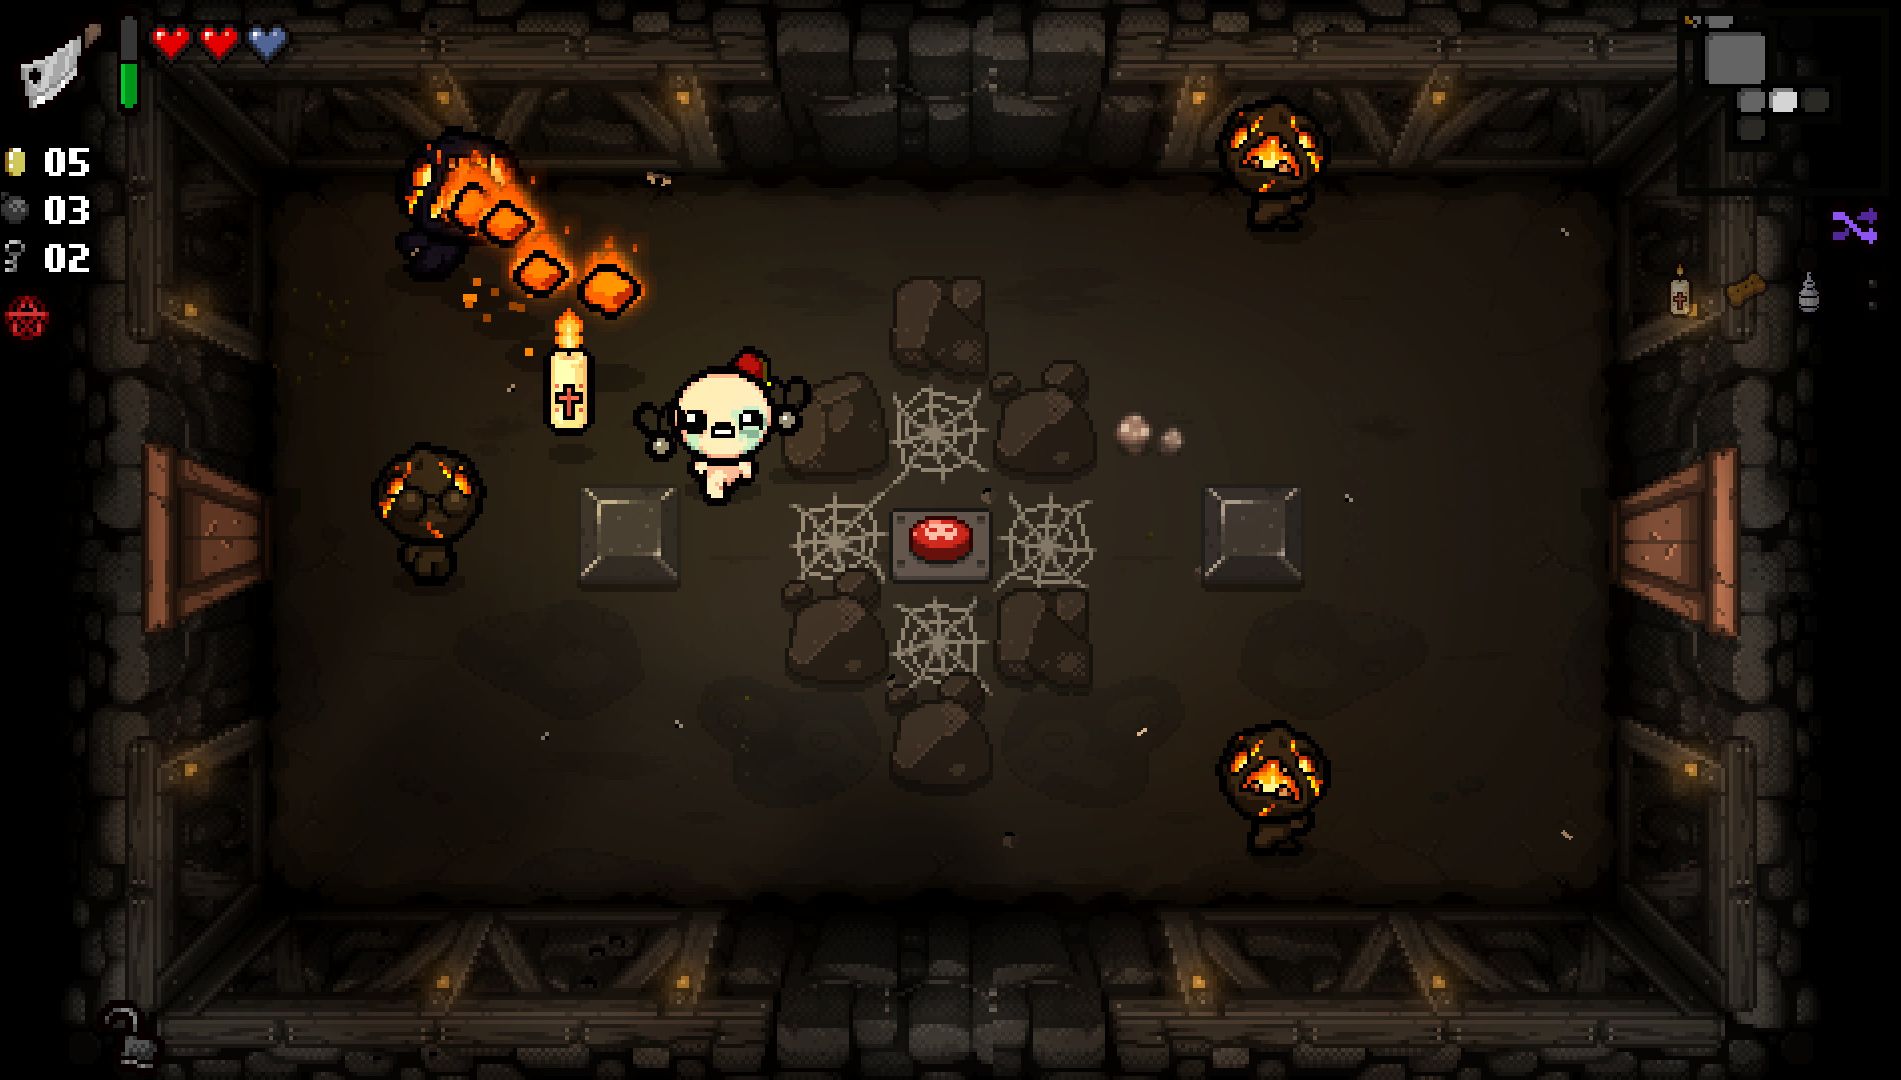 The Binding of Isaac: Repentance free